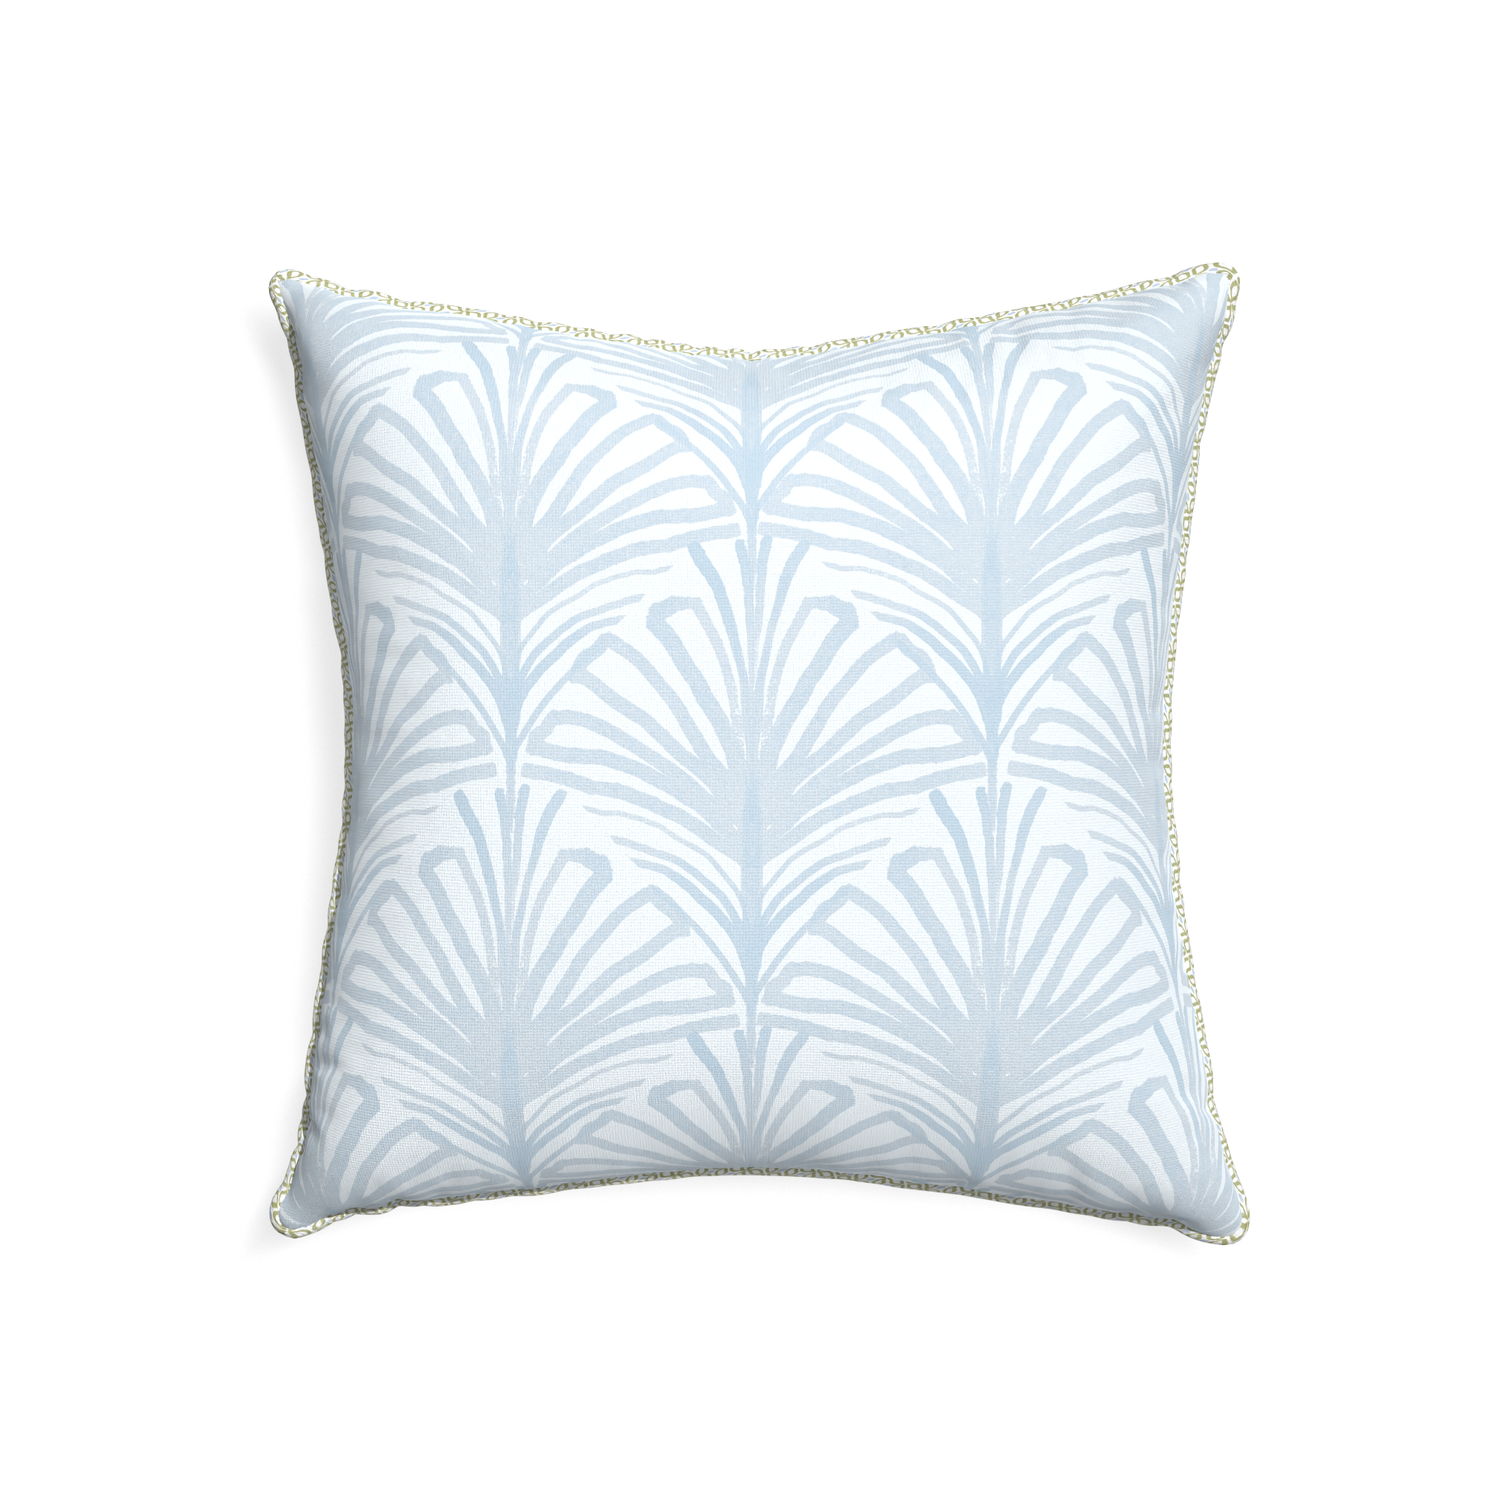 22-square suzy sky custom pillow with l piping on white background